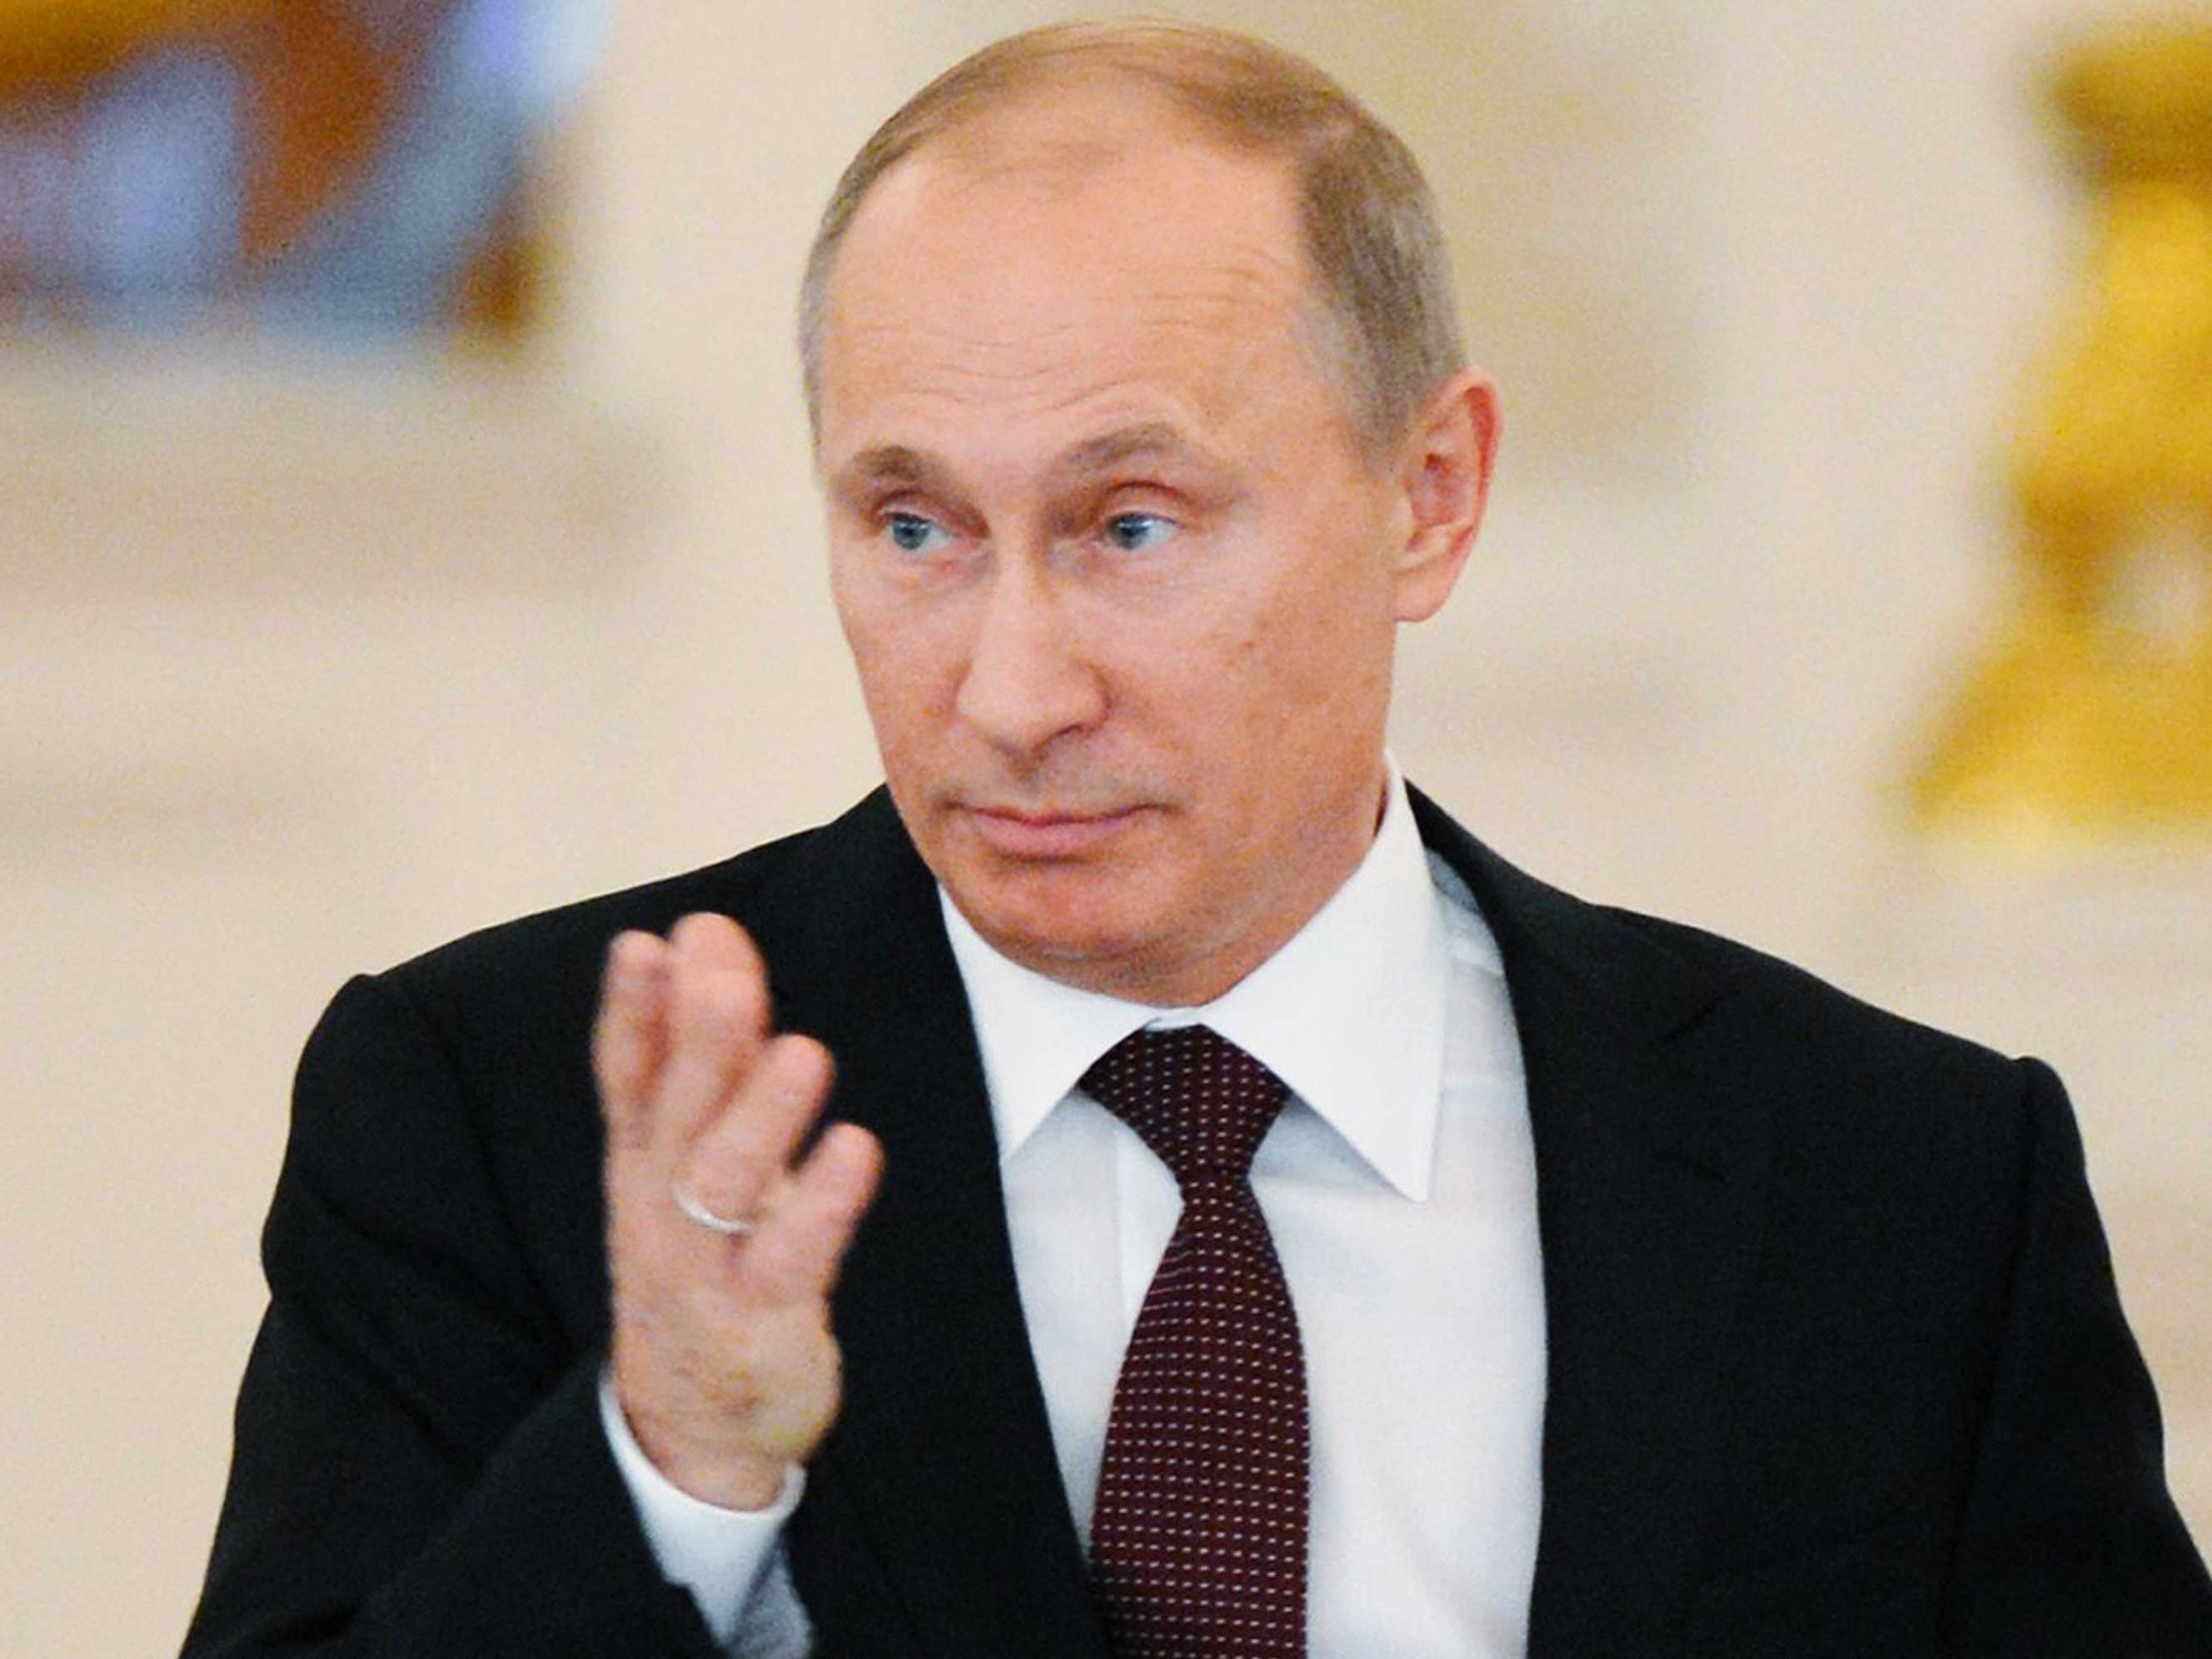 Putin: US, Its Allies Armed Syria Terrorists, Empowered ISIL